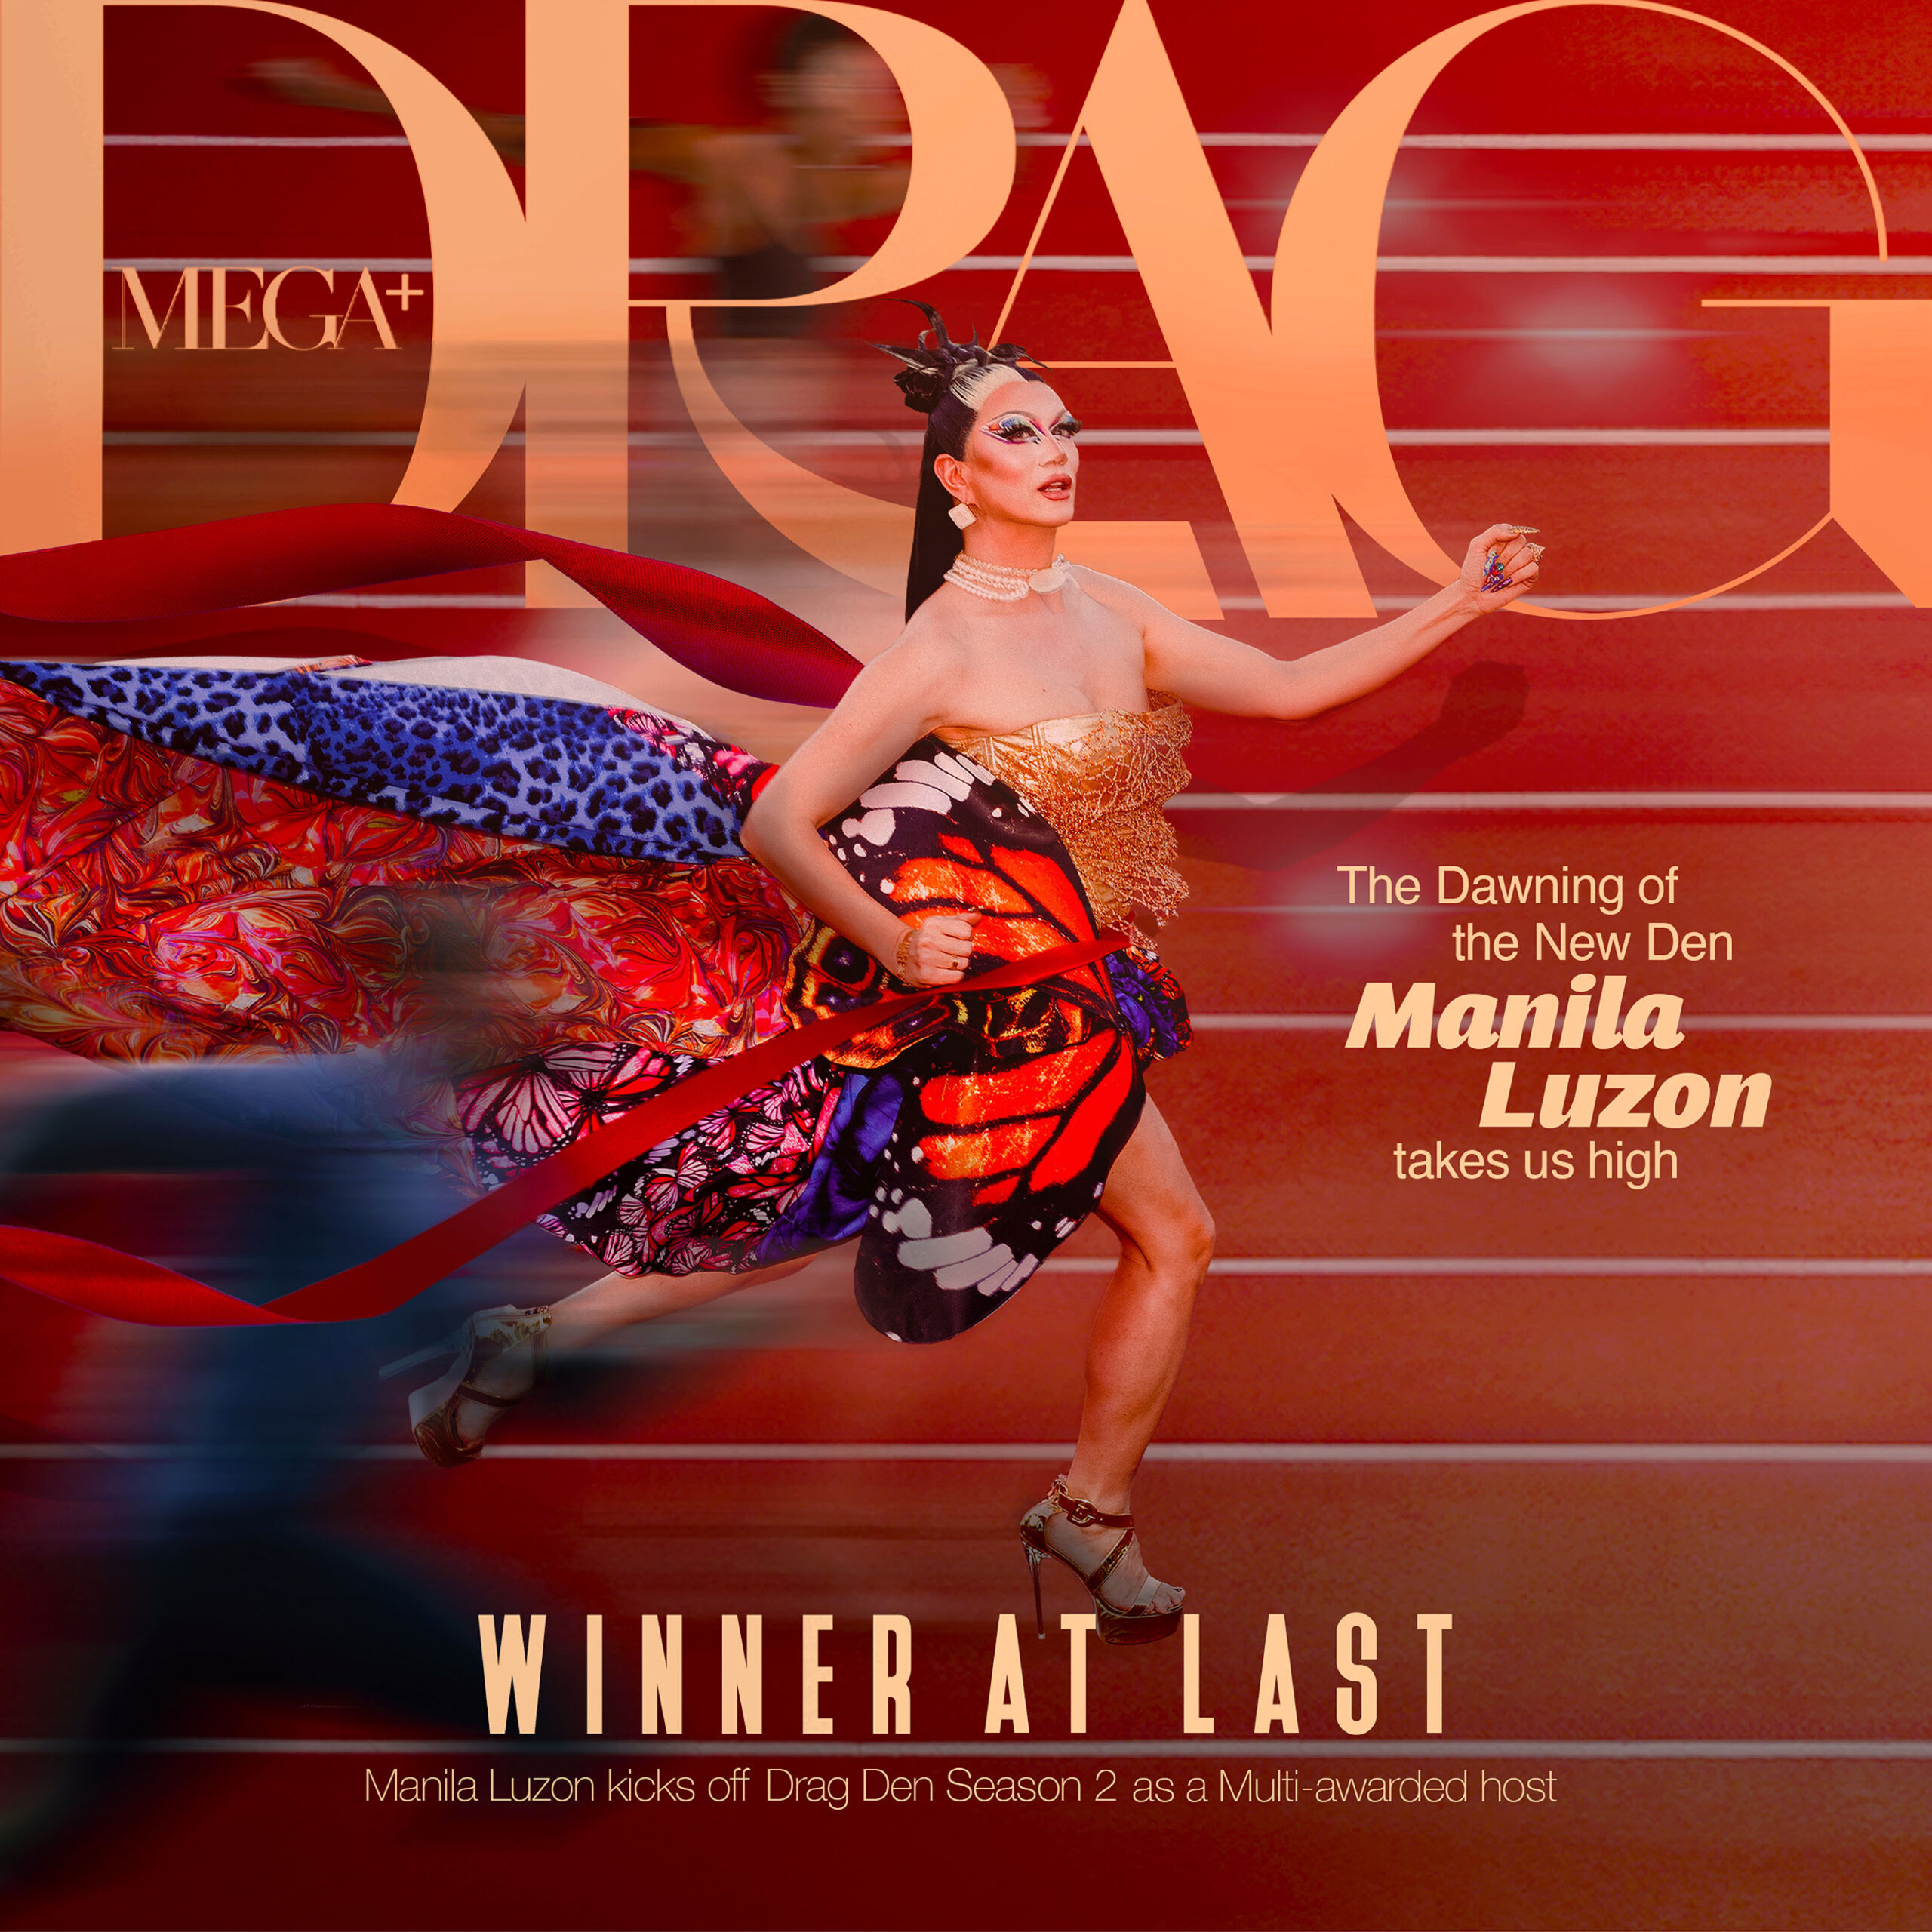 A Toast to the Best Host: Manila Luzon Opens the New Season of Drag Den on a Victorious Note